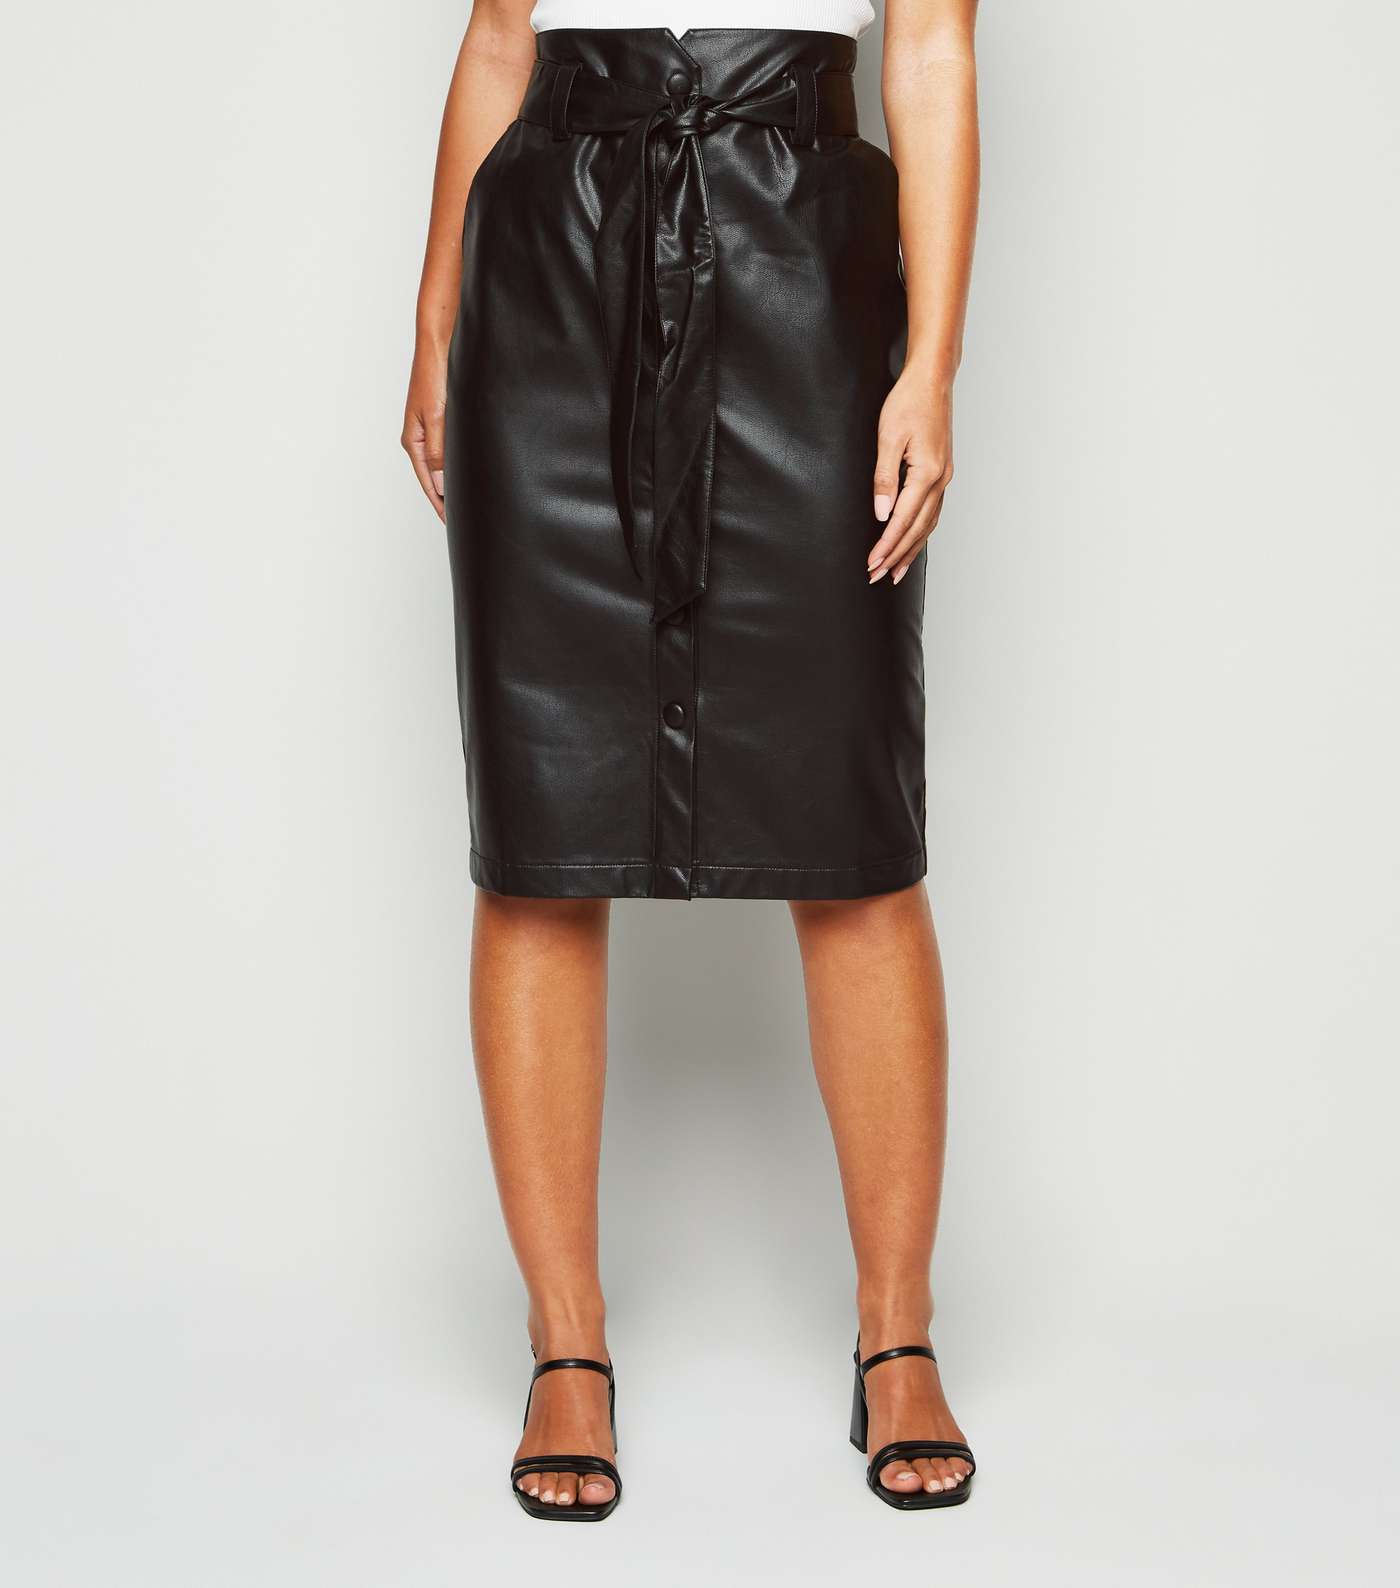 Petite Black Leather-Look Belted Pencil Skirt Image 2